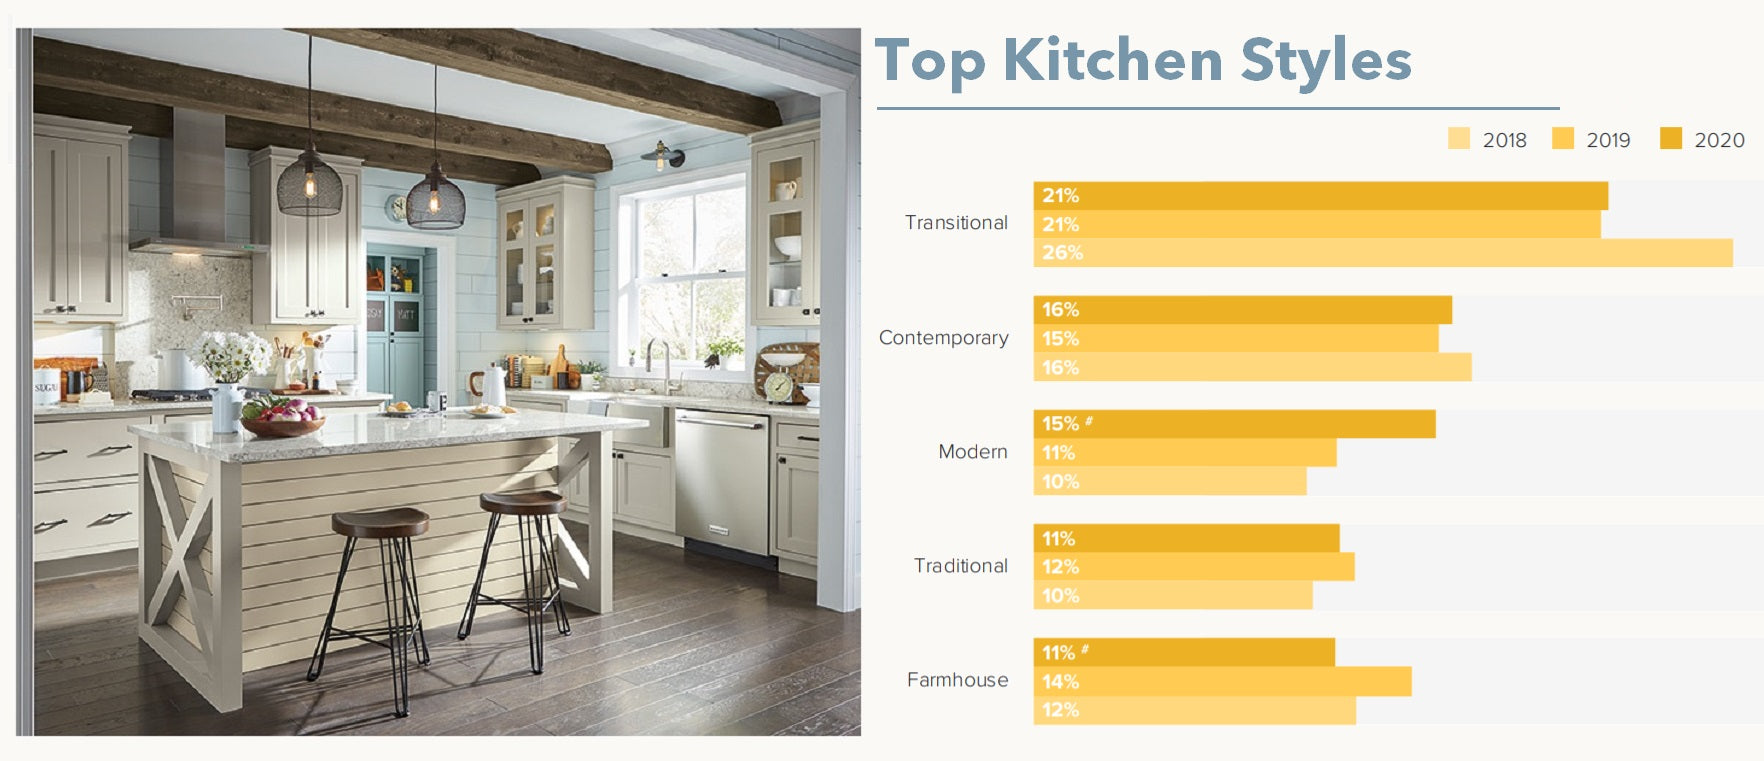 top kitchen style trends for 2020. Farmhouse style is on its way out.